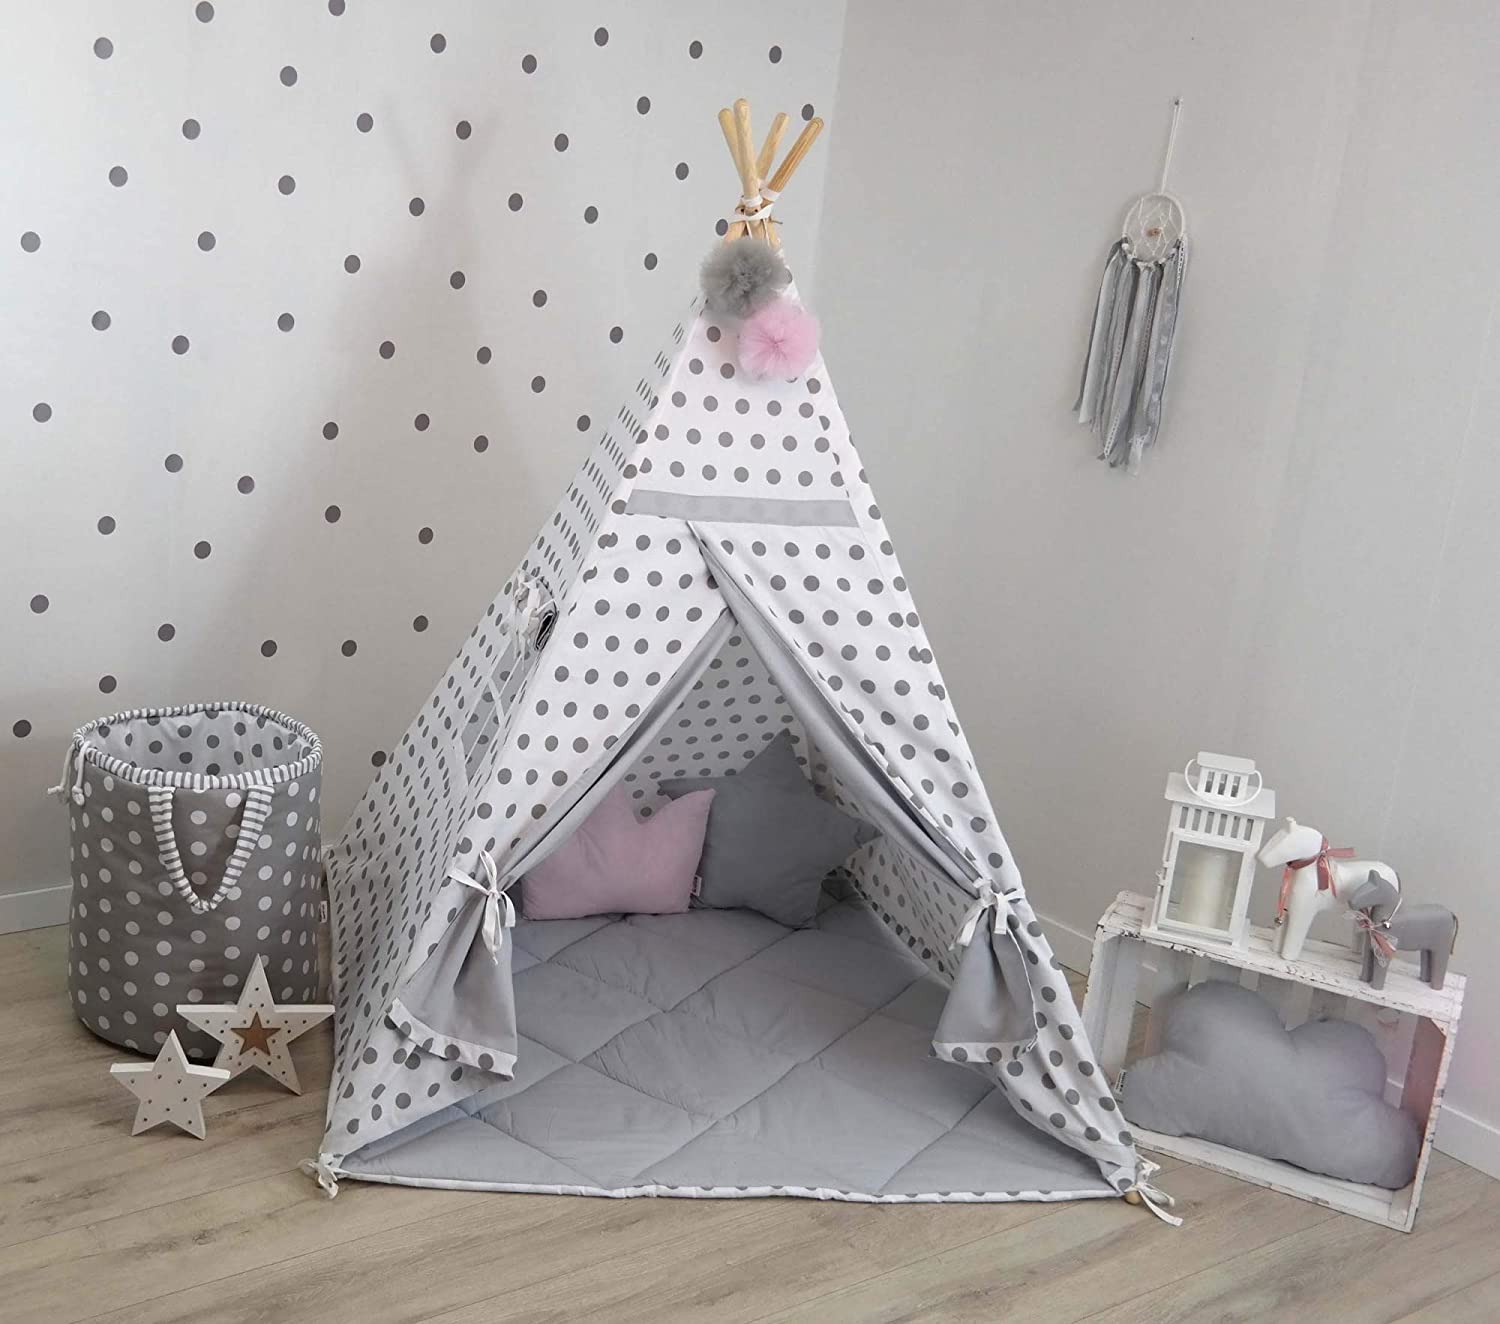 Ts Tipi Teepee 4 Accessories Set Play Tent Children Tent, Native American, 